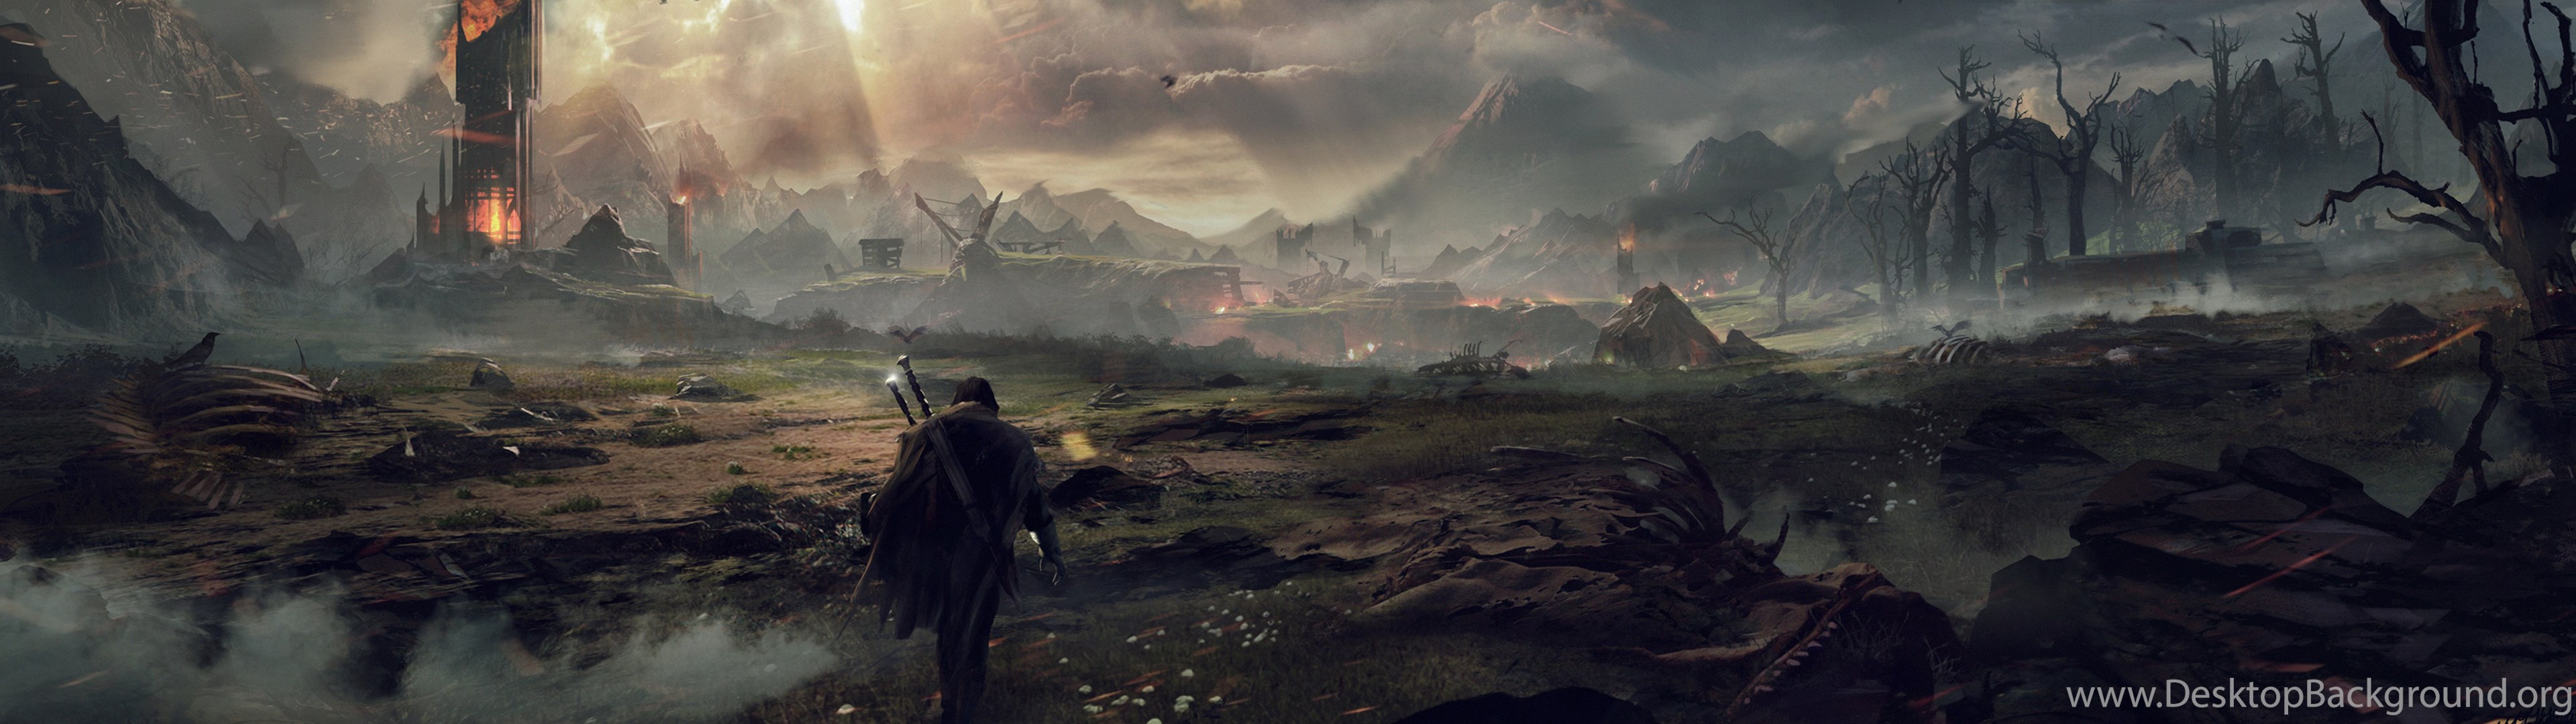 85 Middle Earth Shadow Of Mordor Hd Wallpapers Desktop Background